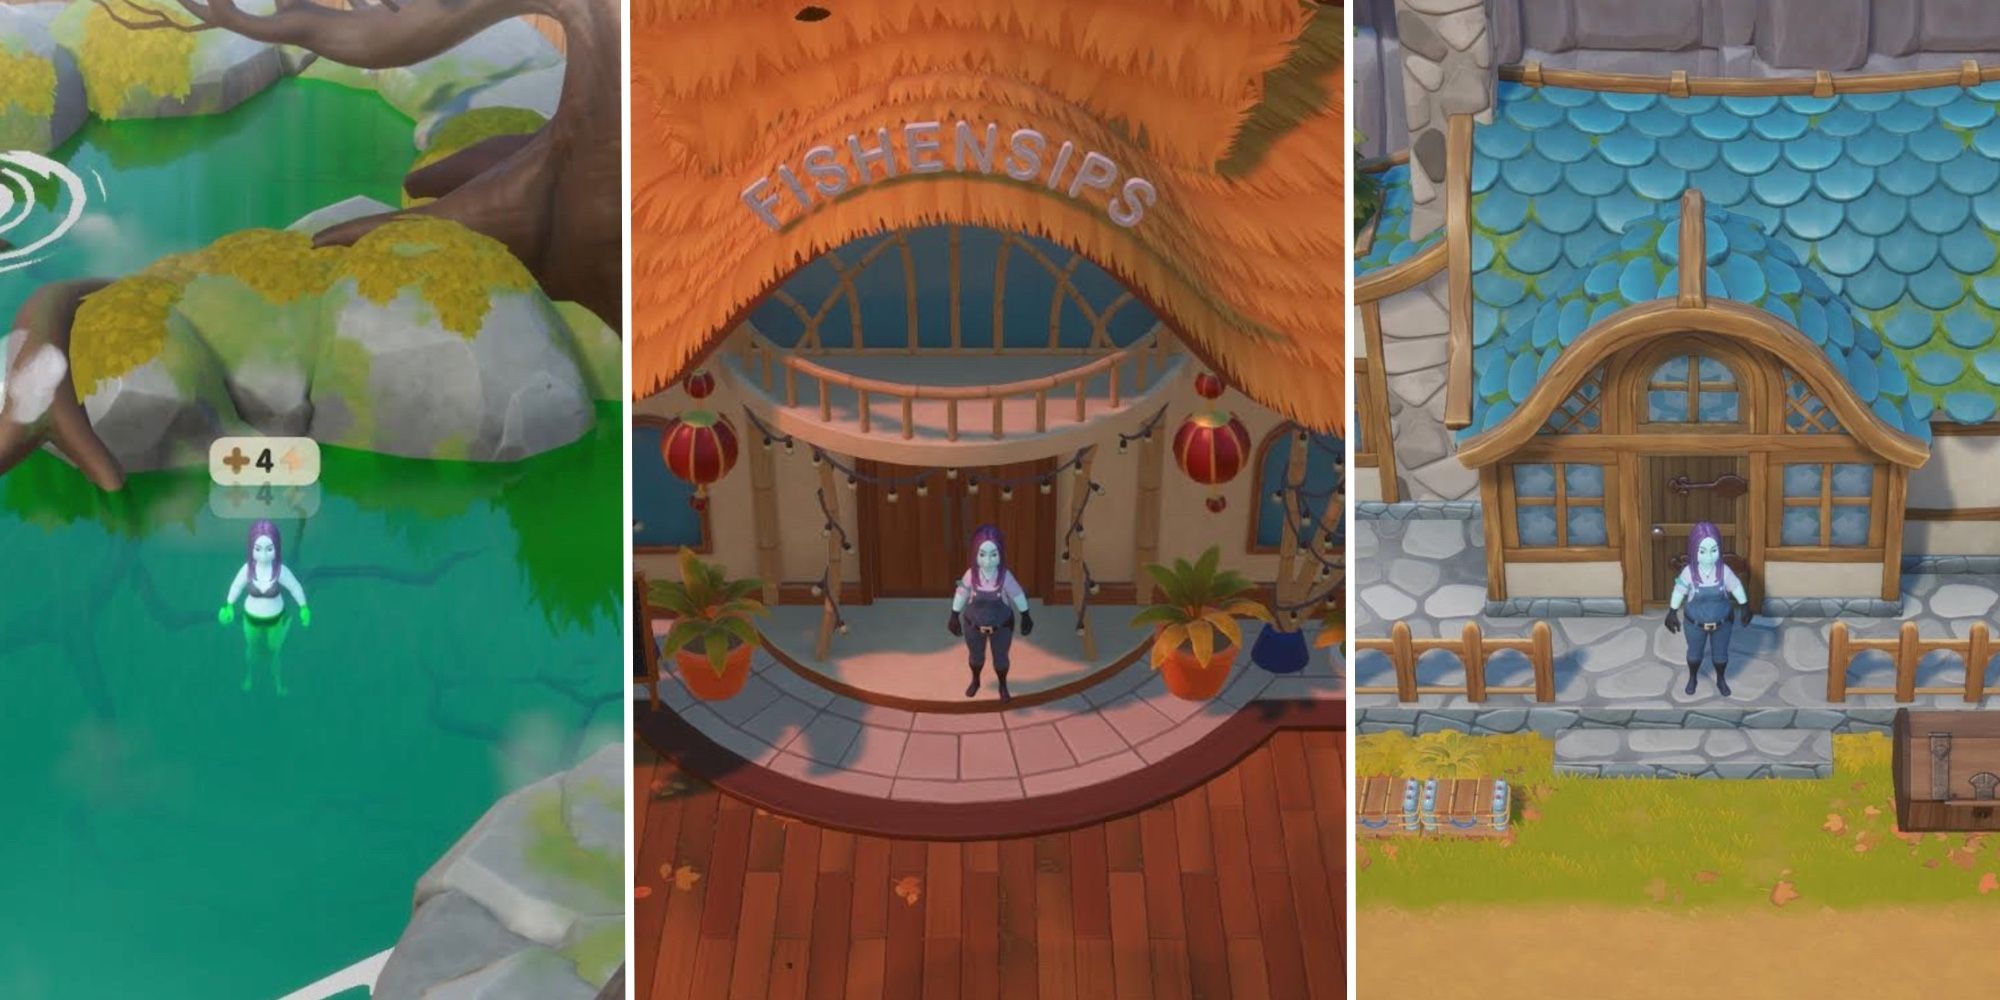 Coral Island avatar in center panel standing in the entrance to Fishensips, in the left panel avatar standing in the hot springs, and in the right panel avatar standing in front of their house to represent cooking food at home.